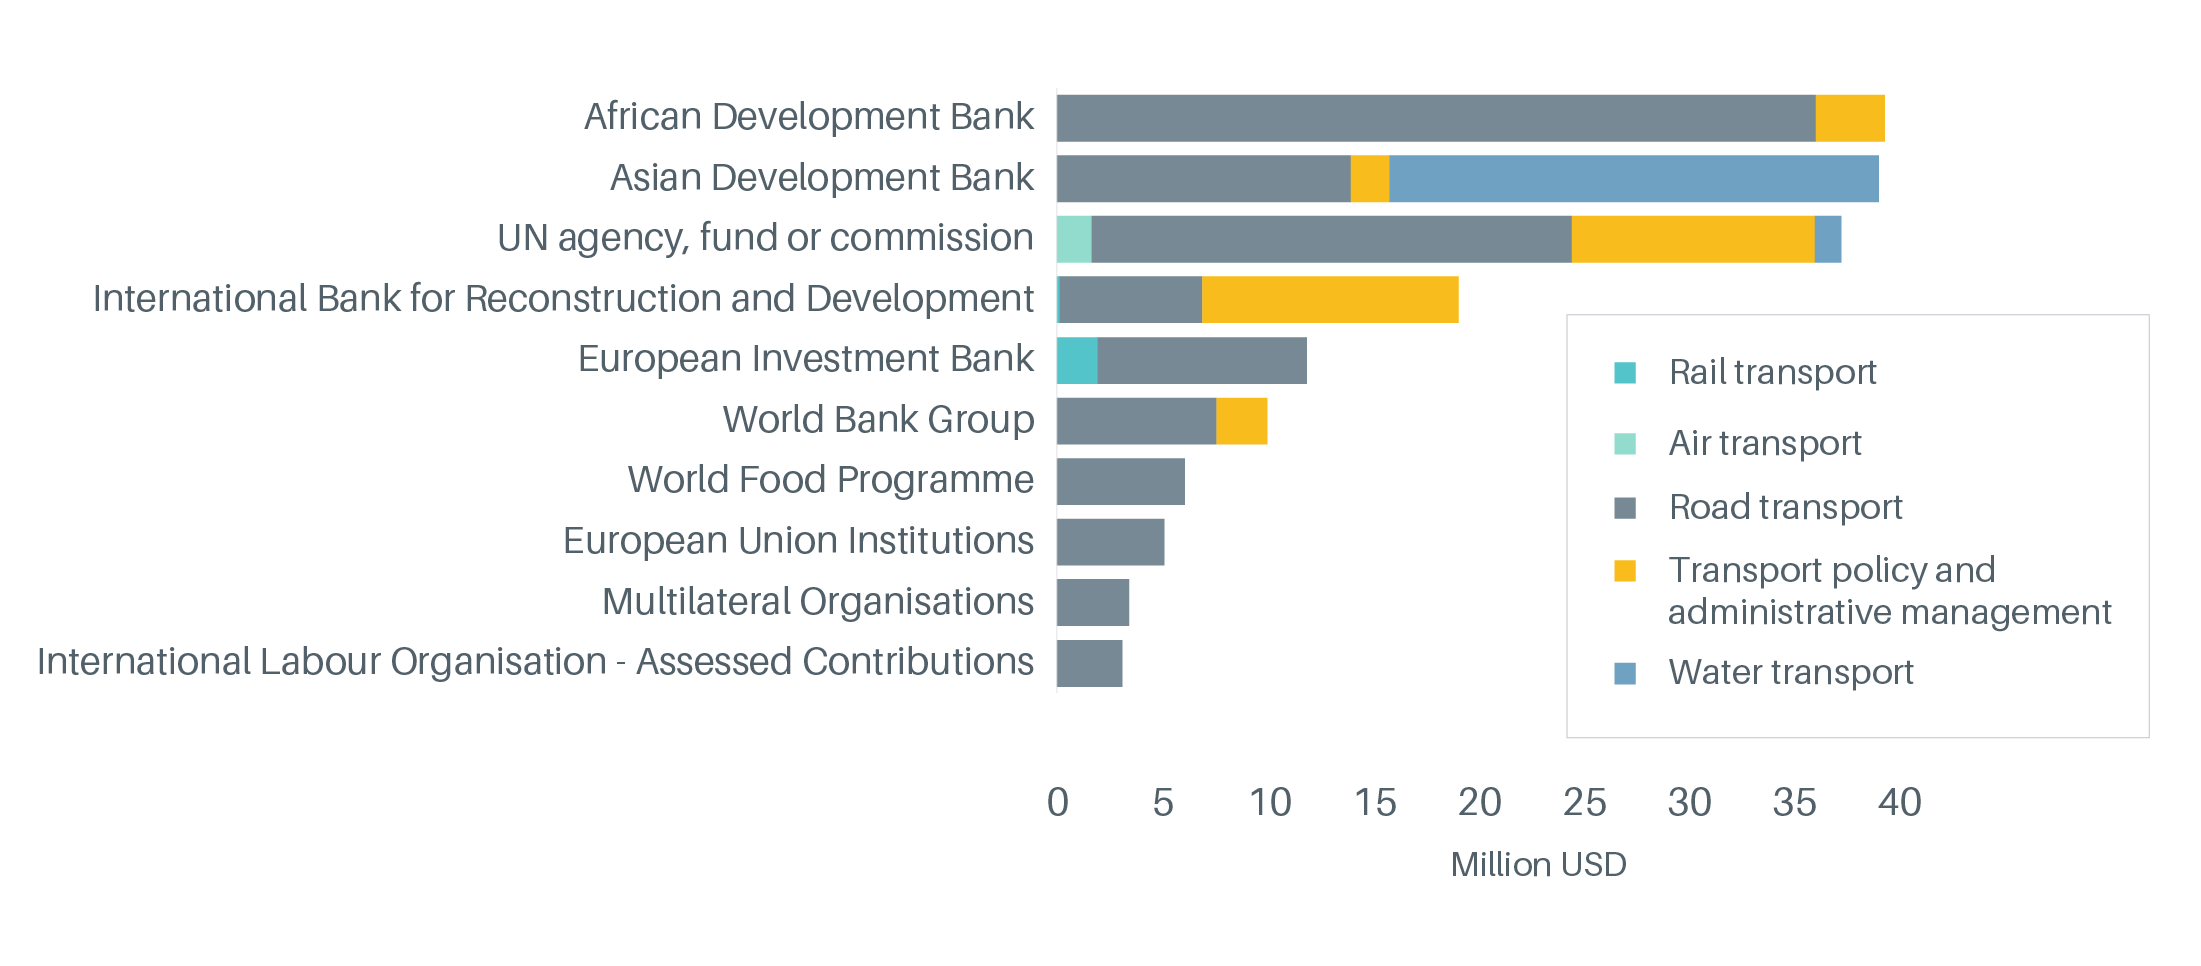 Official development assistance to transport from the top 10 development partners, by sub-sector, 2019